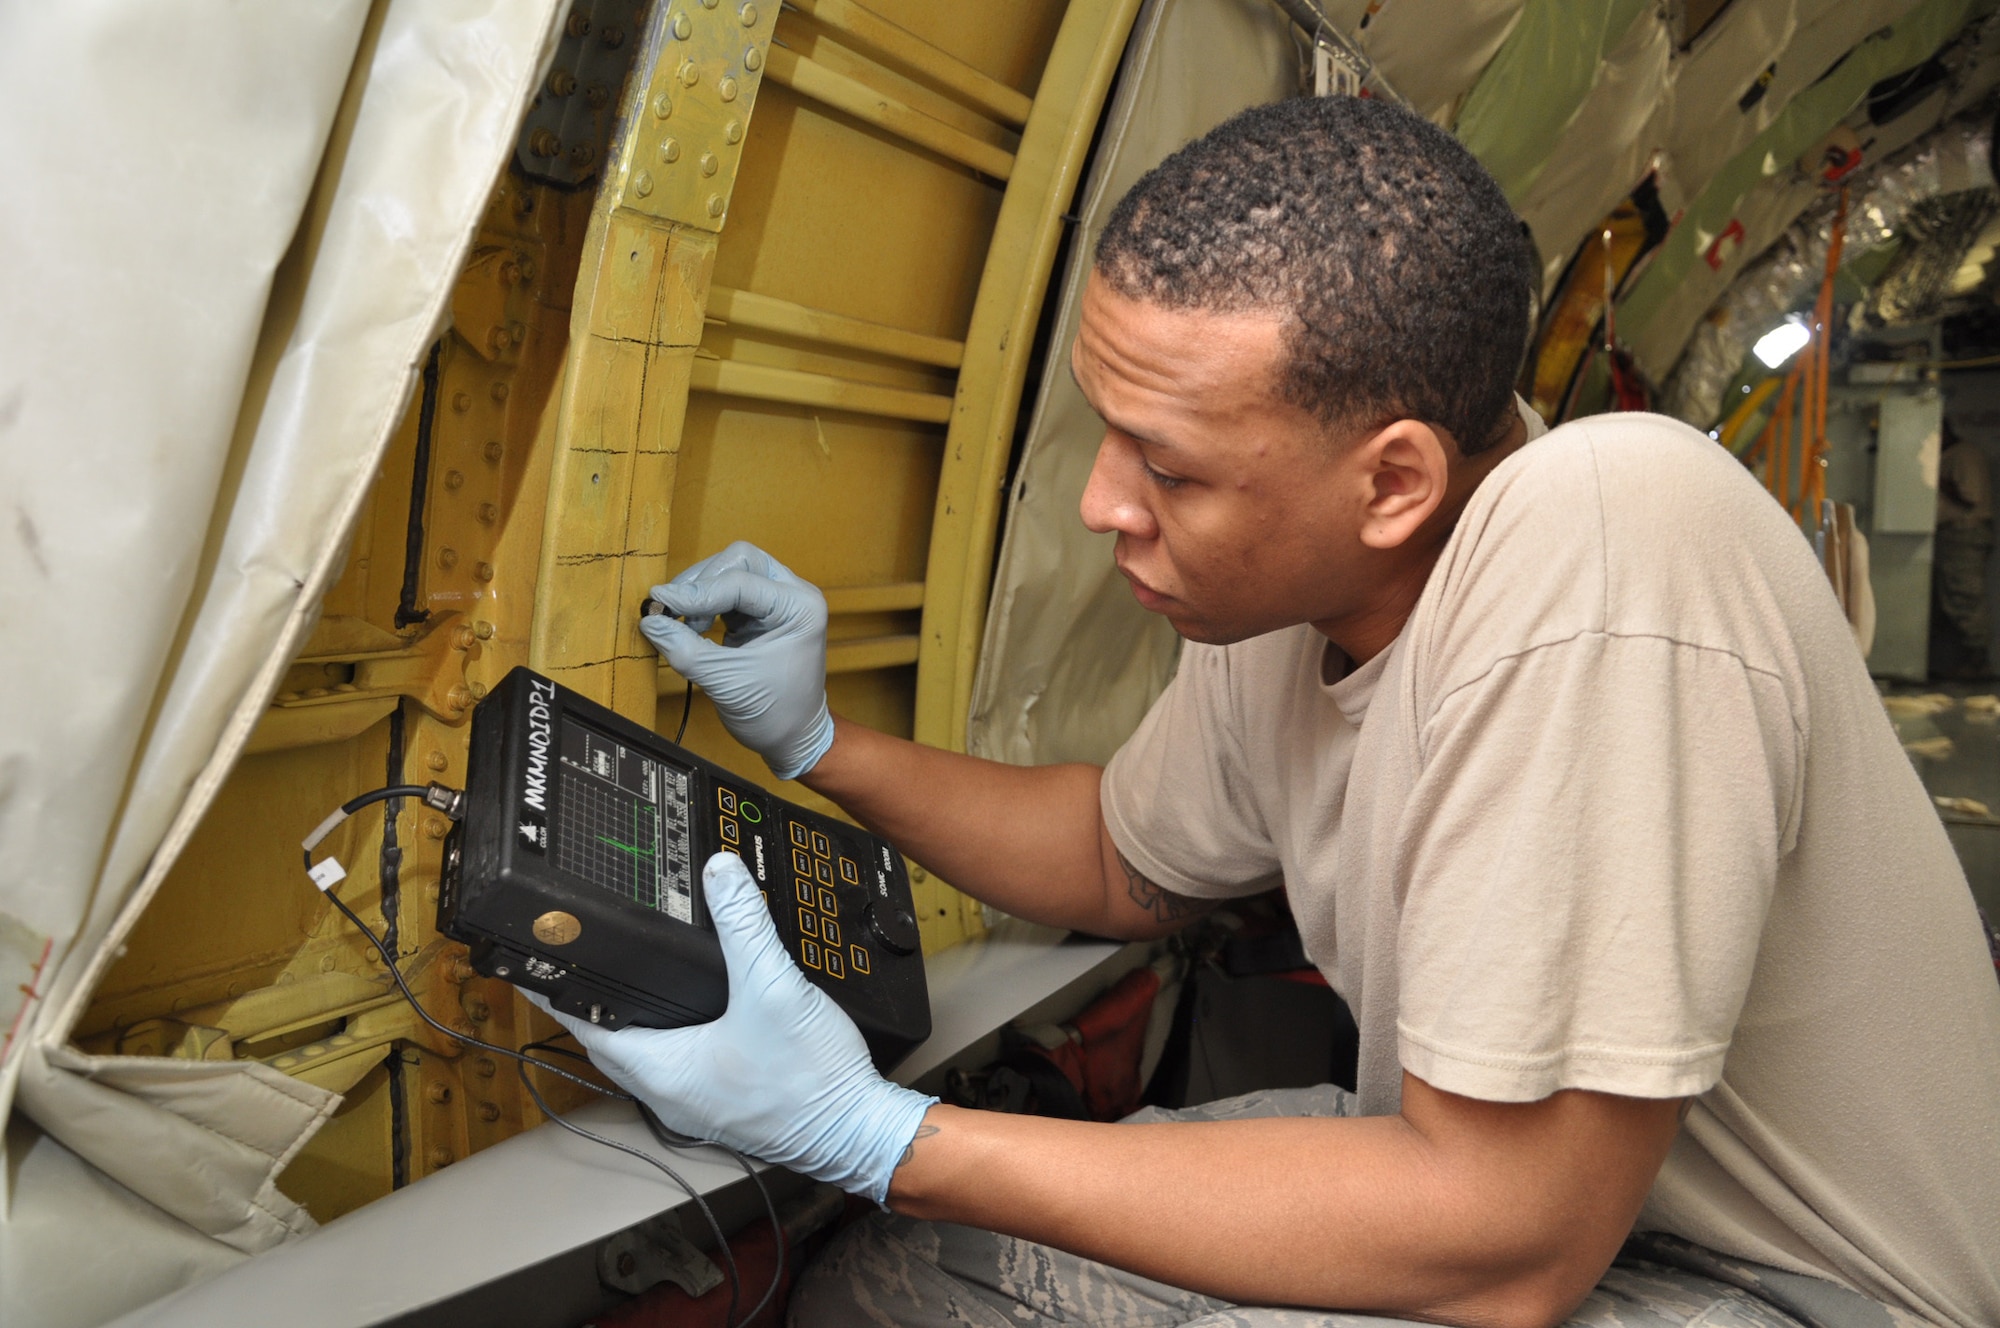 Staff Sgt. Bryan Tyler, 22nd Maintenance Squadron, uses an an ultrasonic transducer to search for defects in the bulkhead of a KC-135 Stratotanker. (Air Force photo by Tech. Sgt. Brannen Parrish)